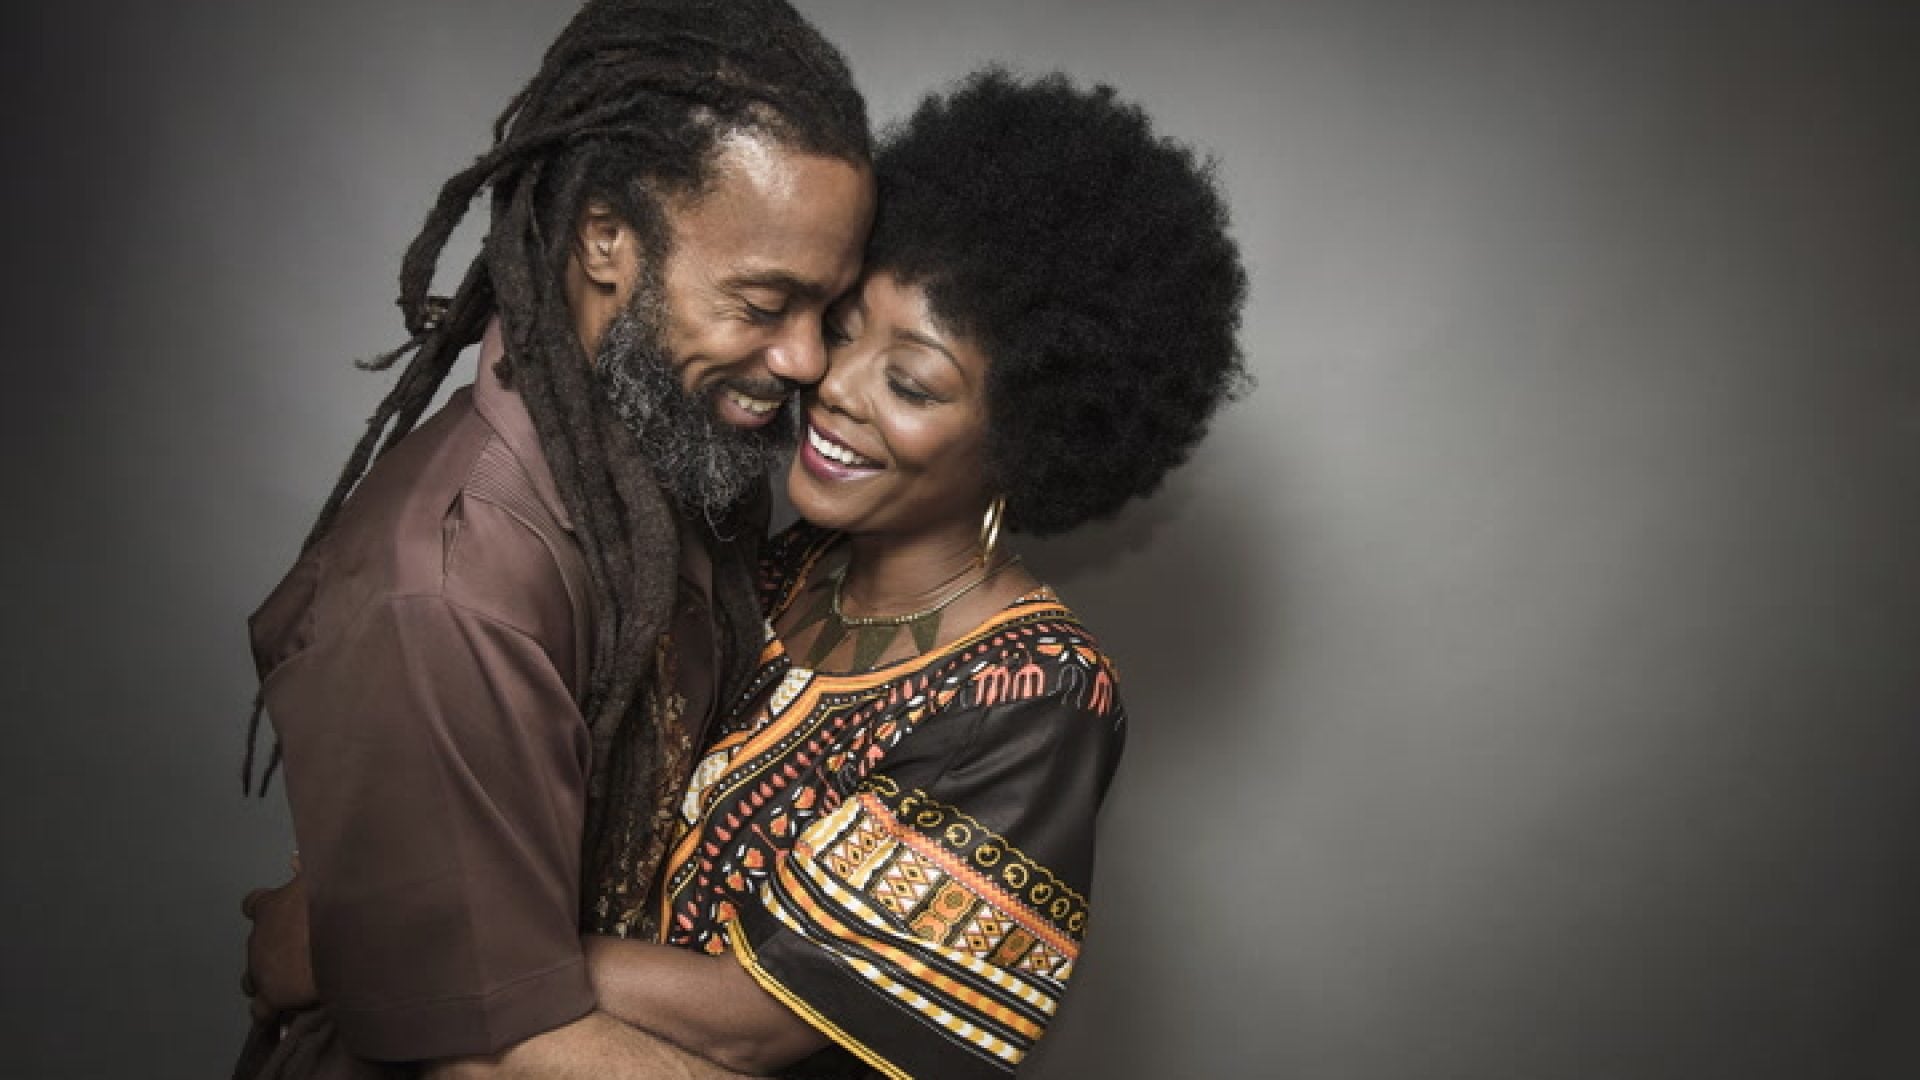 WATCH: In My Feed – The First Black Love Story In America